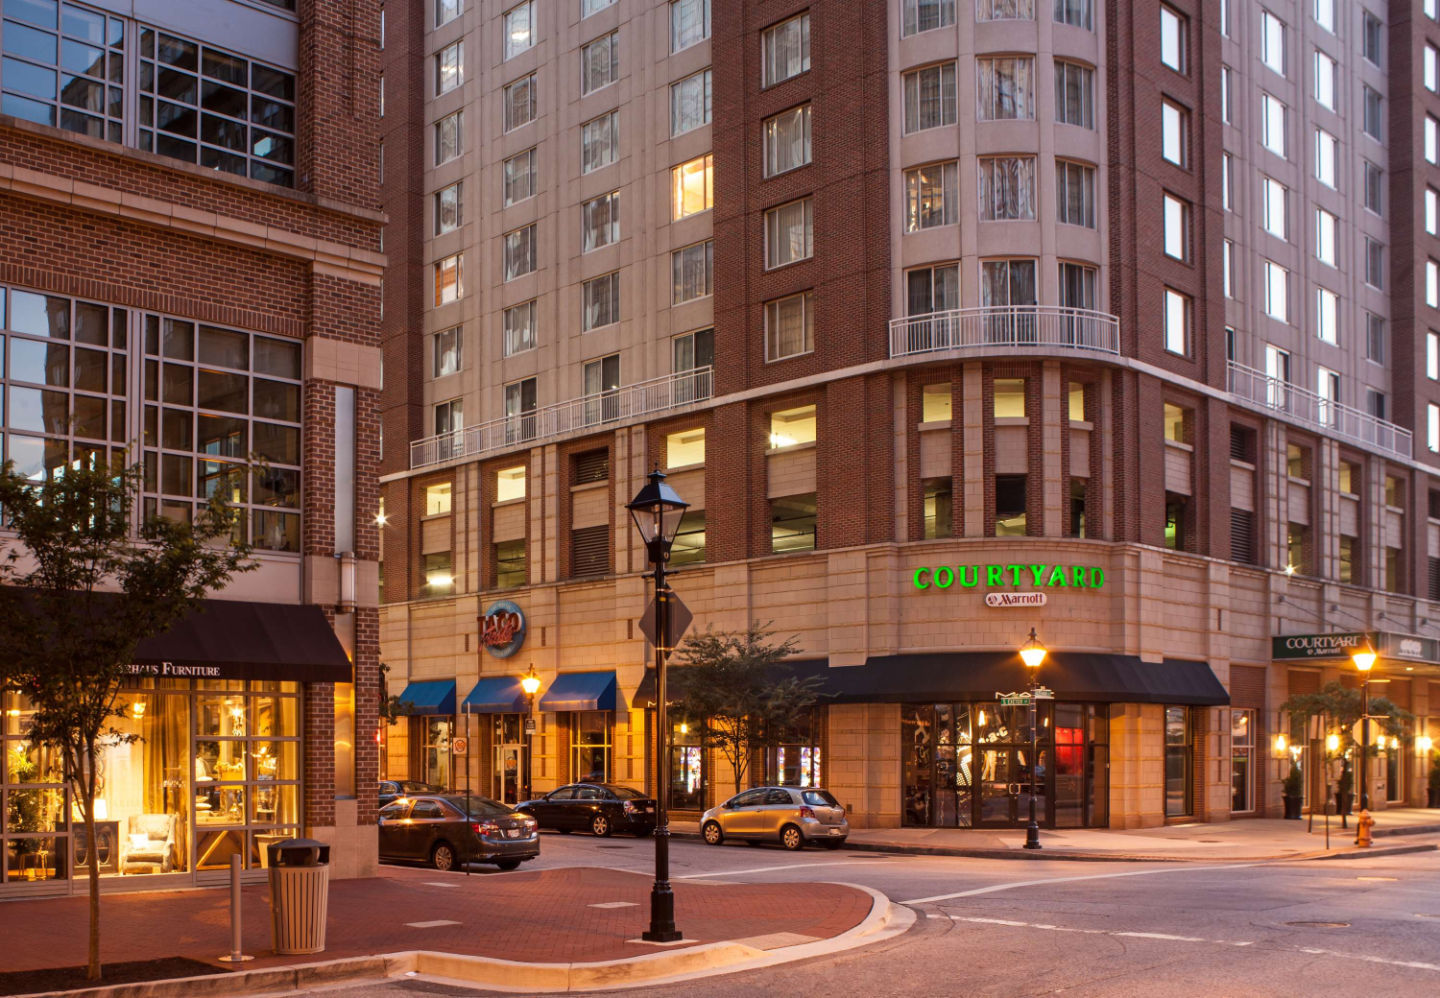 Photo of Courtyard by Marriott Baltimore Downtown/Inner Harbor, Baltimore, MD